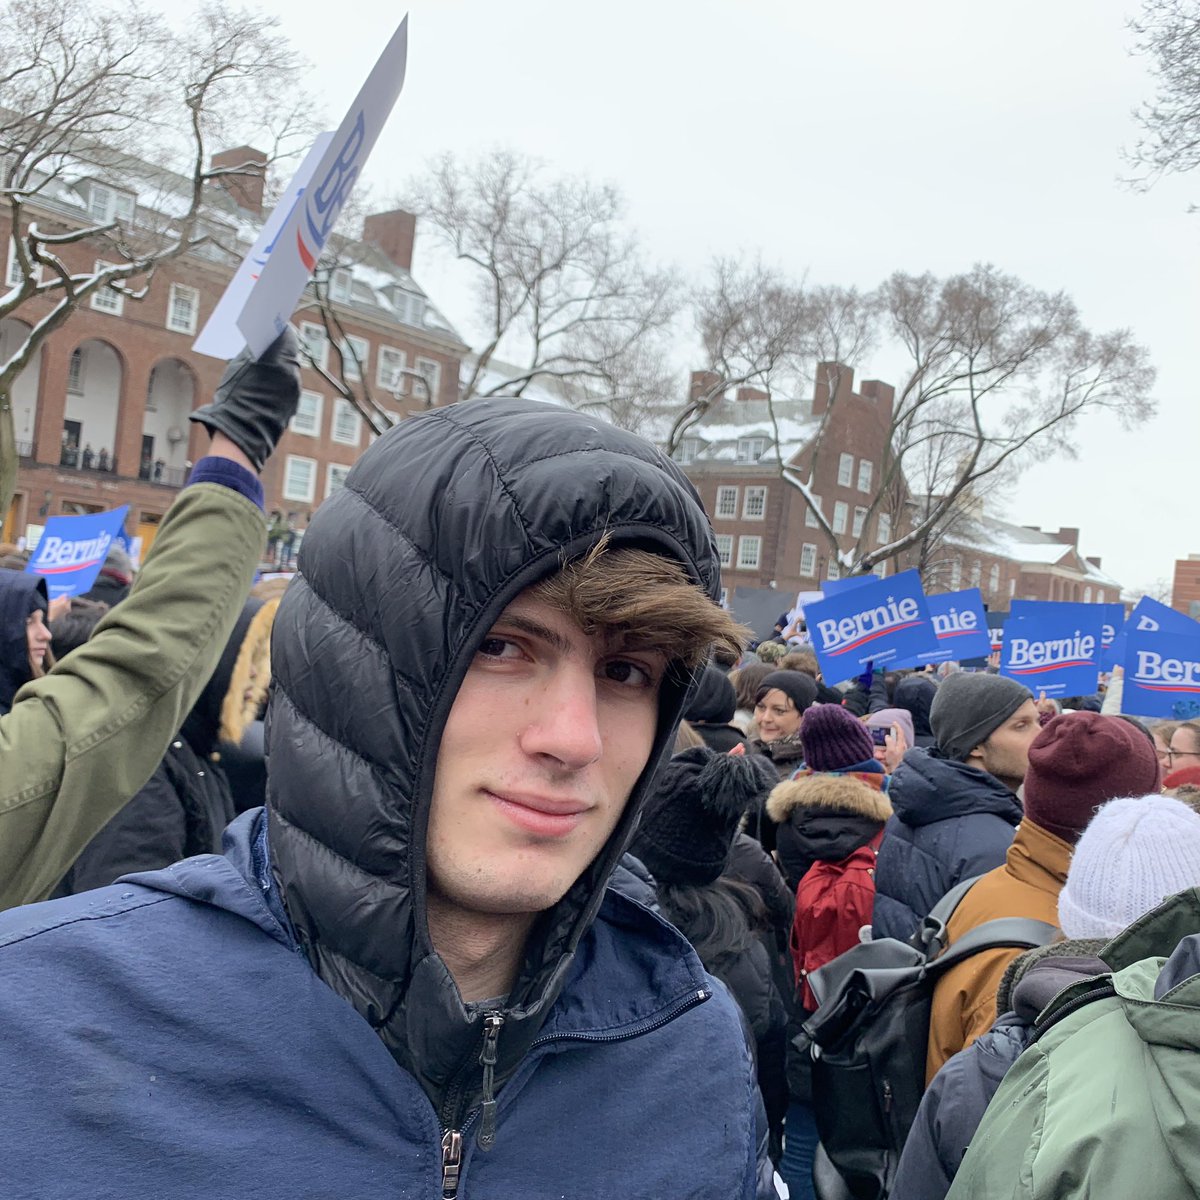 Dragged my 15 y/o out of bed and into BK to see and hear Bernie.
 We loved every freezing minute.He actually smiled at the end .Big day for both of us. Let’s get it done this time!!! #BernieInBrooklyn, #BERNIE2020